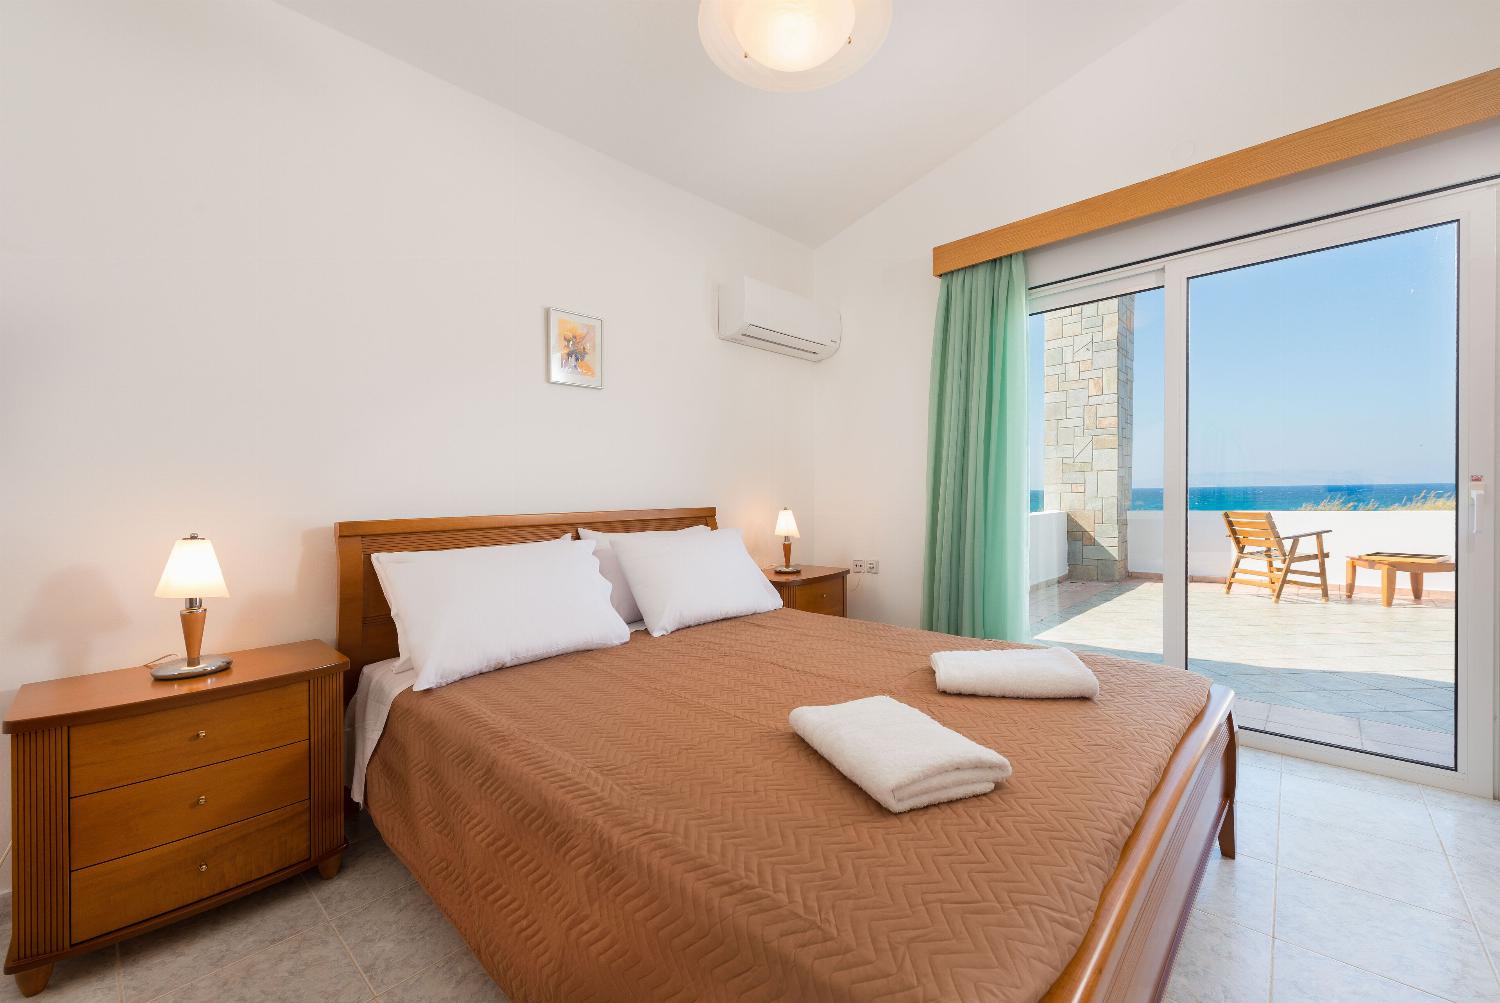 Double bed bedroom with terrace access with panoramic sea view